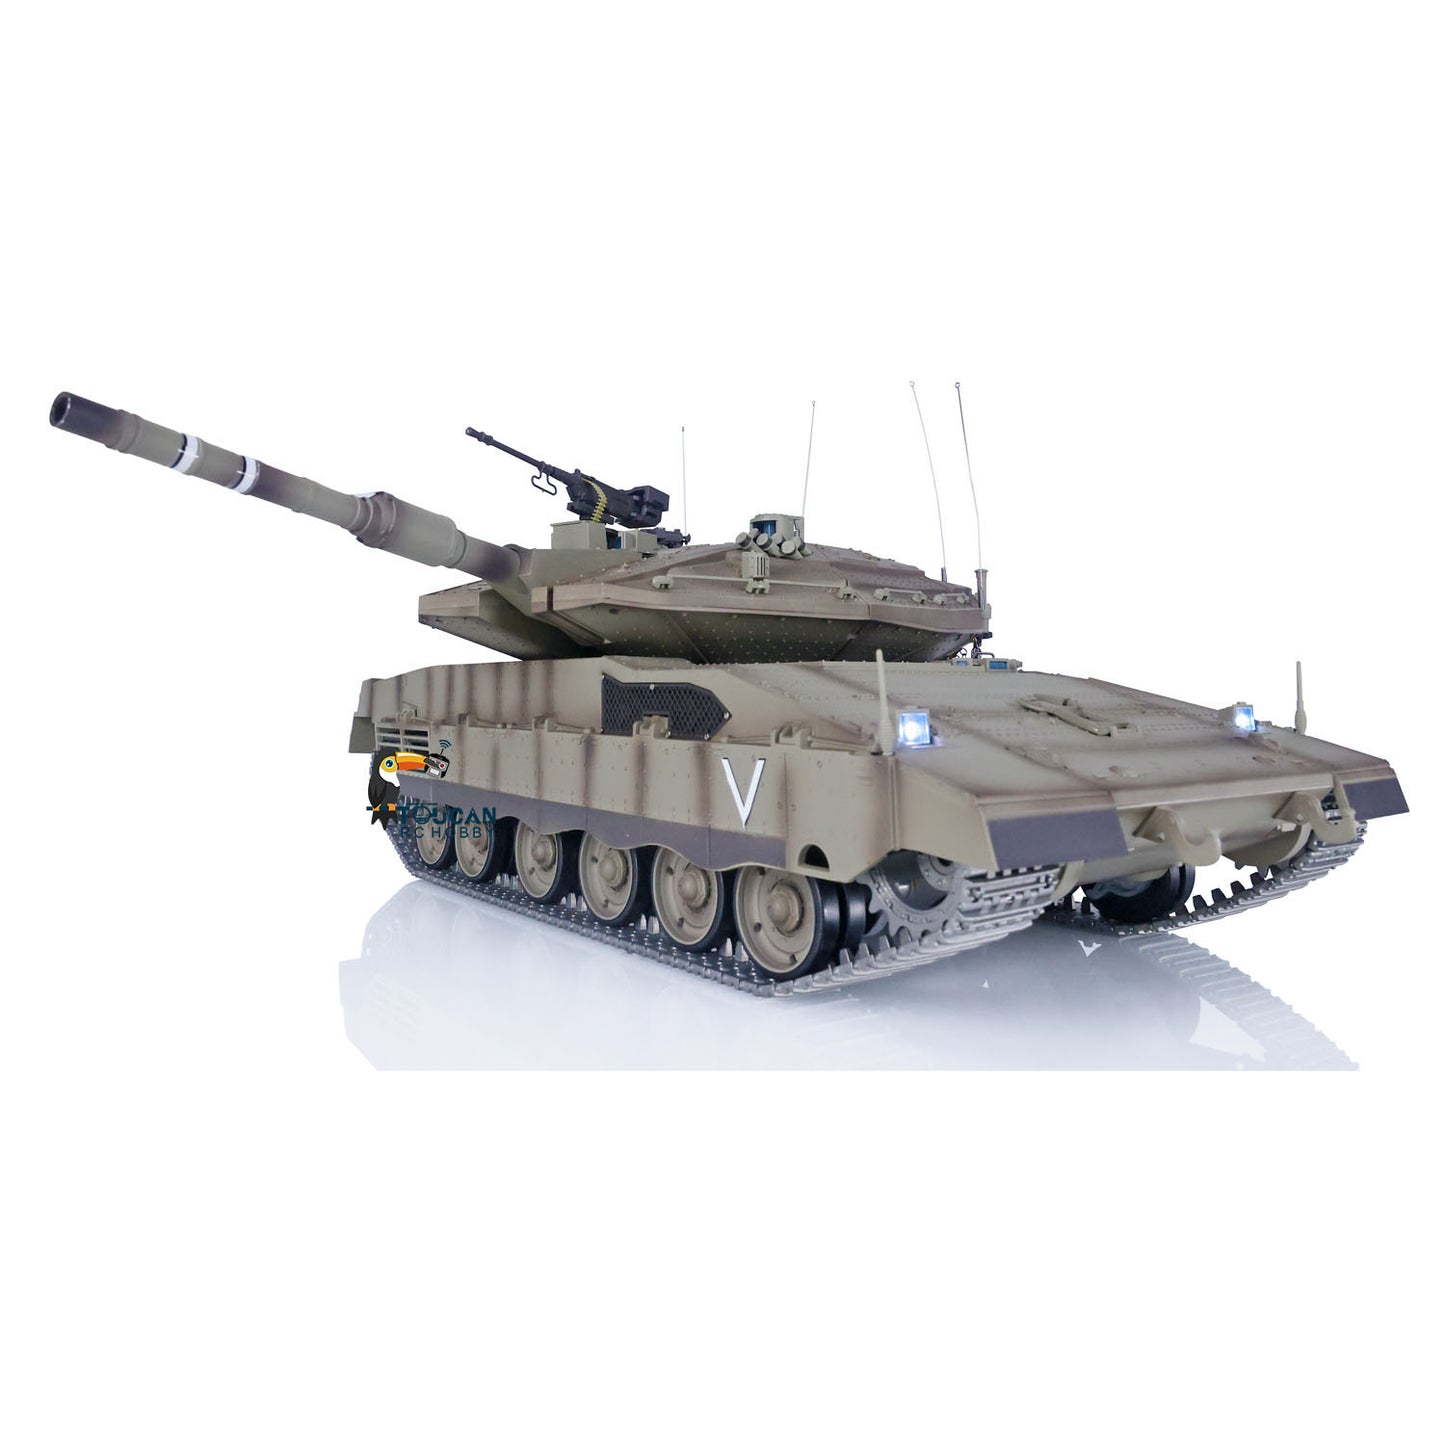 IN STOCK 1:16 IR System RC Military Main Battle Tanks Heng Long IDF Merkava MK IV 3958 Upgraded Promotion Edition With Barrel Recoil